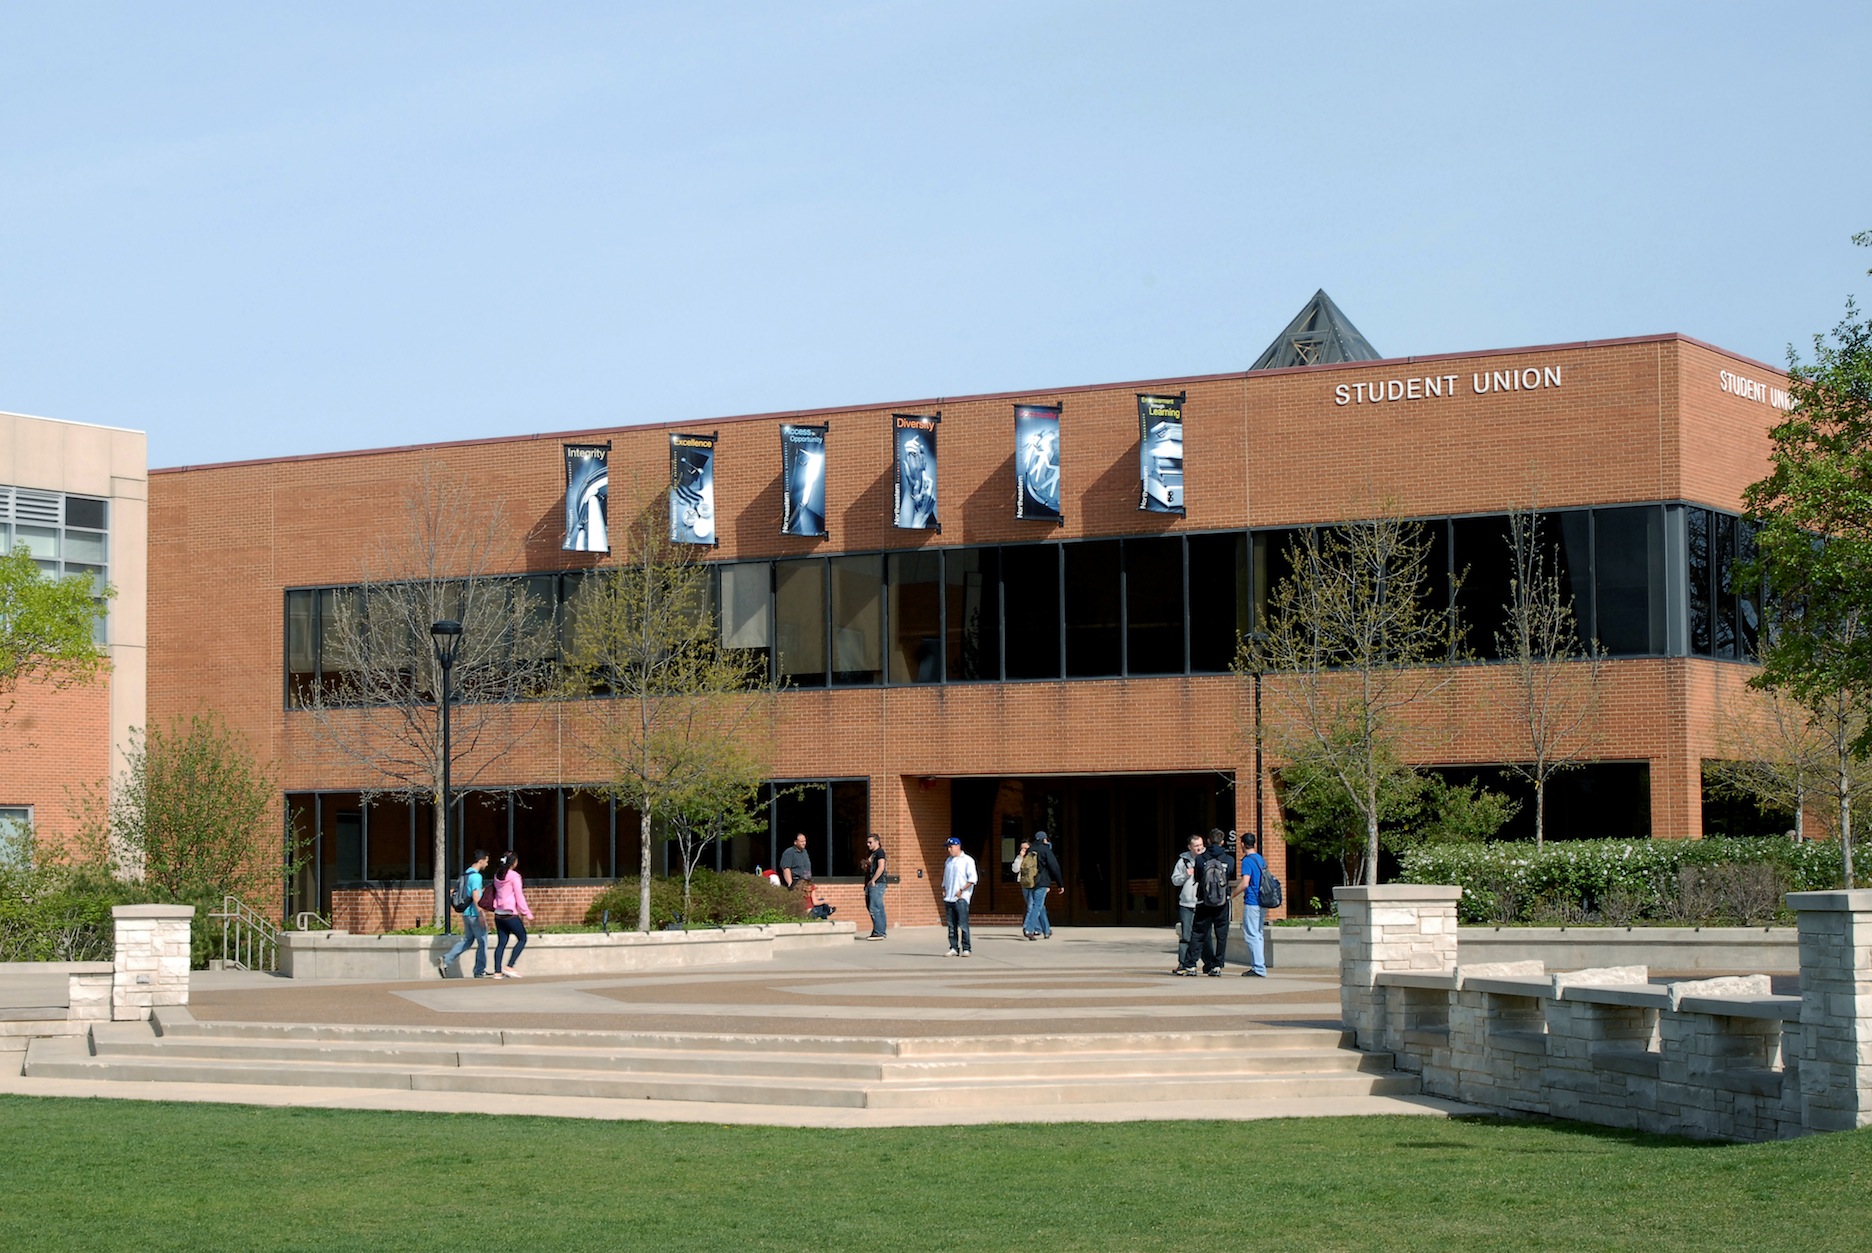 Exterior of Student Union building